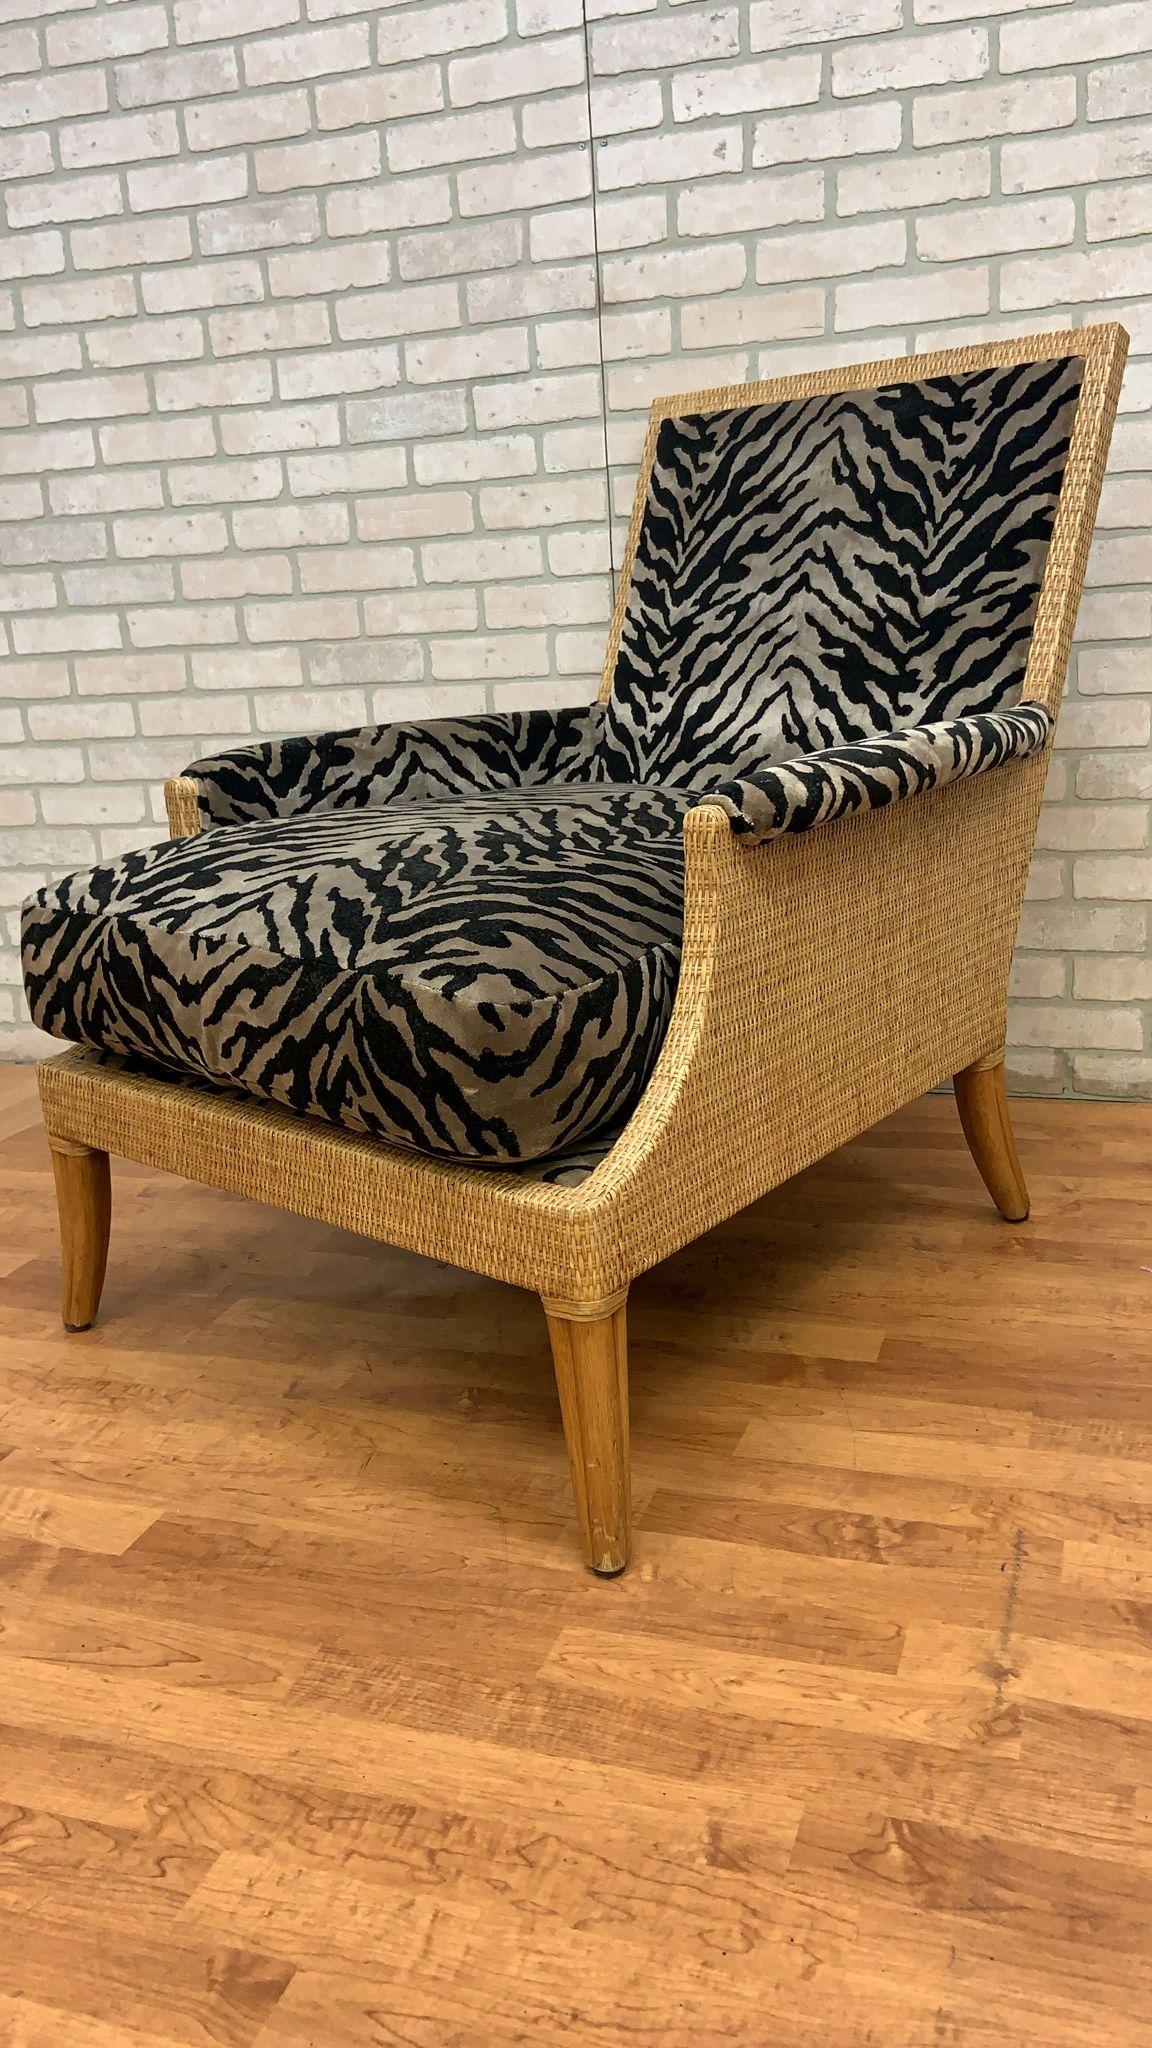 Mid-20th Century Vintage McGuire Rattan and Wicker Umbria Lounge Chair with Ottoman, 2 Piece Set For Sale